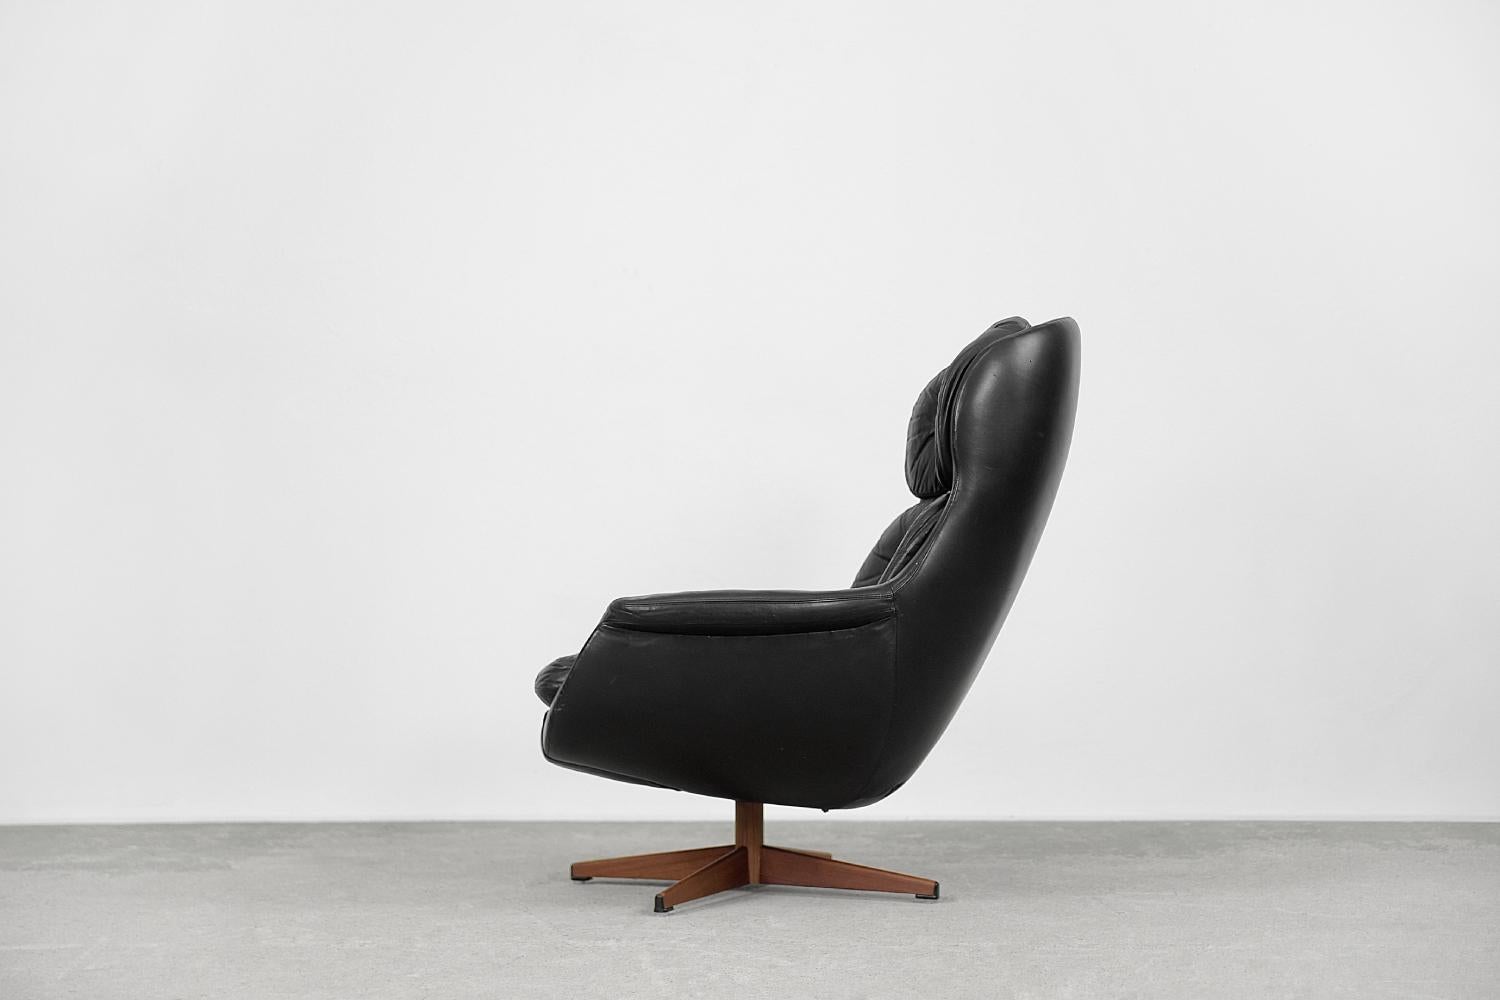 Late 20th Century Vintage Swedish Modernist Leather Swivel Lounge Chair from Selig Imperial, 1970s For Sale